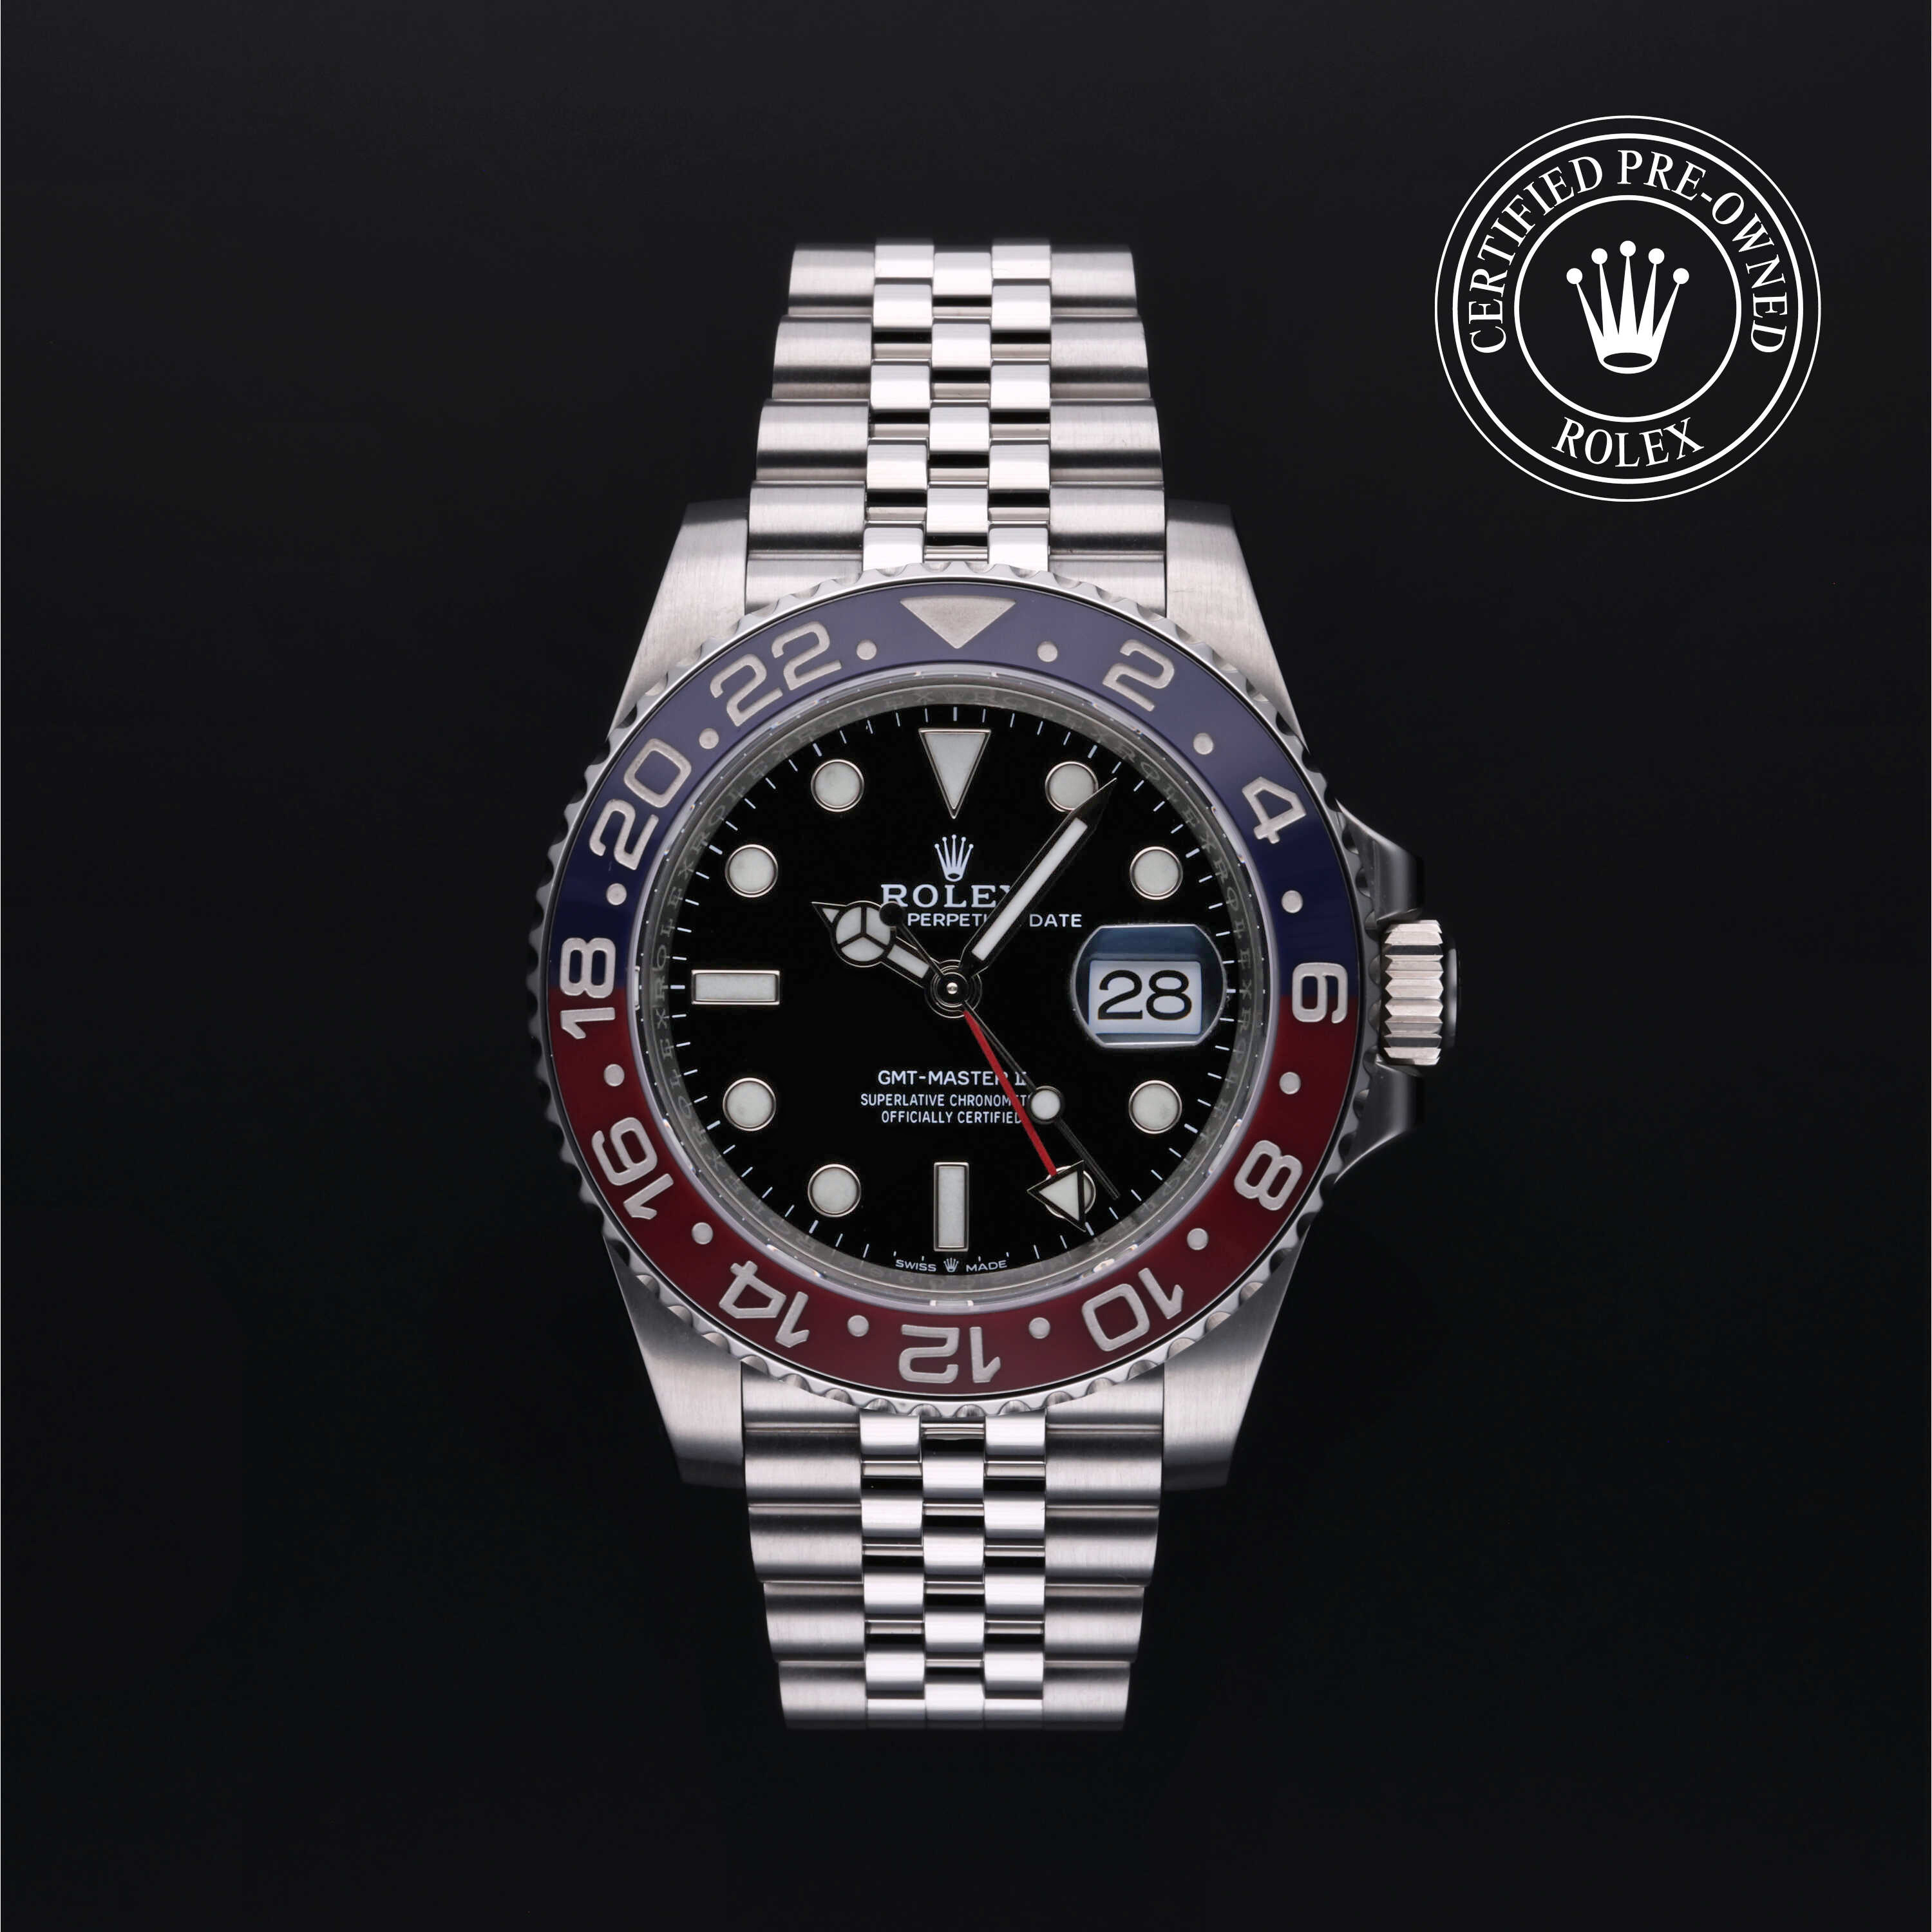 Rolex Certified Pre-Owned GMT-Master II (126710BLRO)